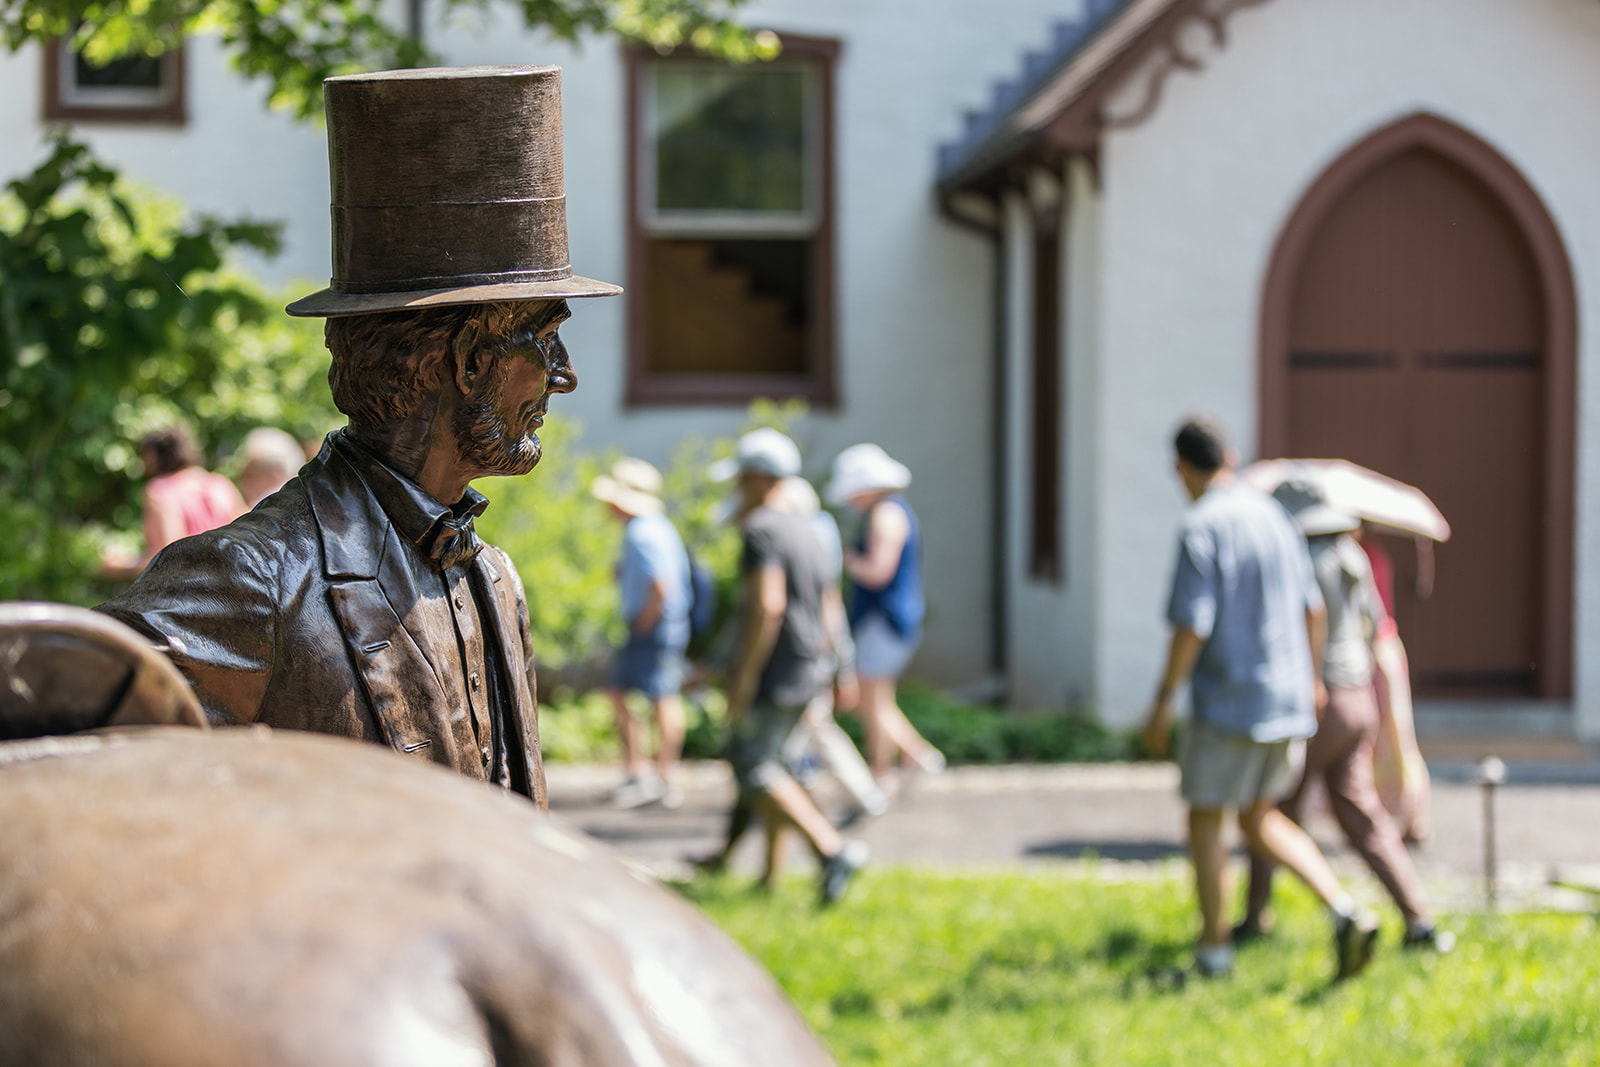 A close-up detail of a bronze statue of President Lincoln in front of the cottage.